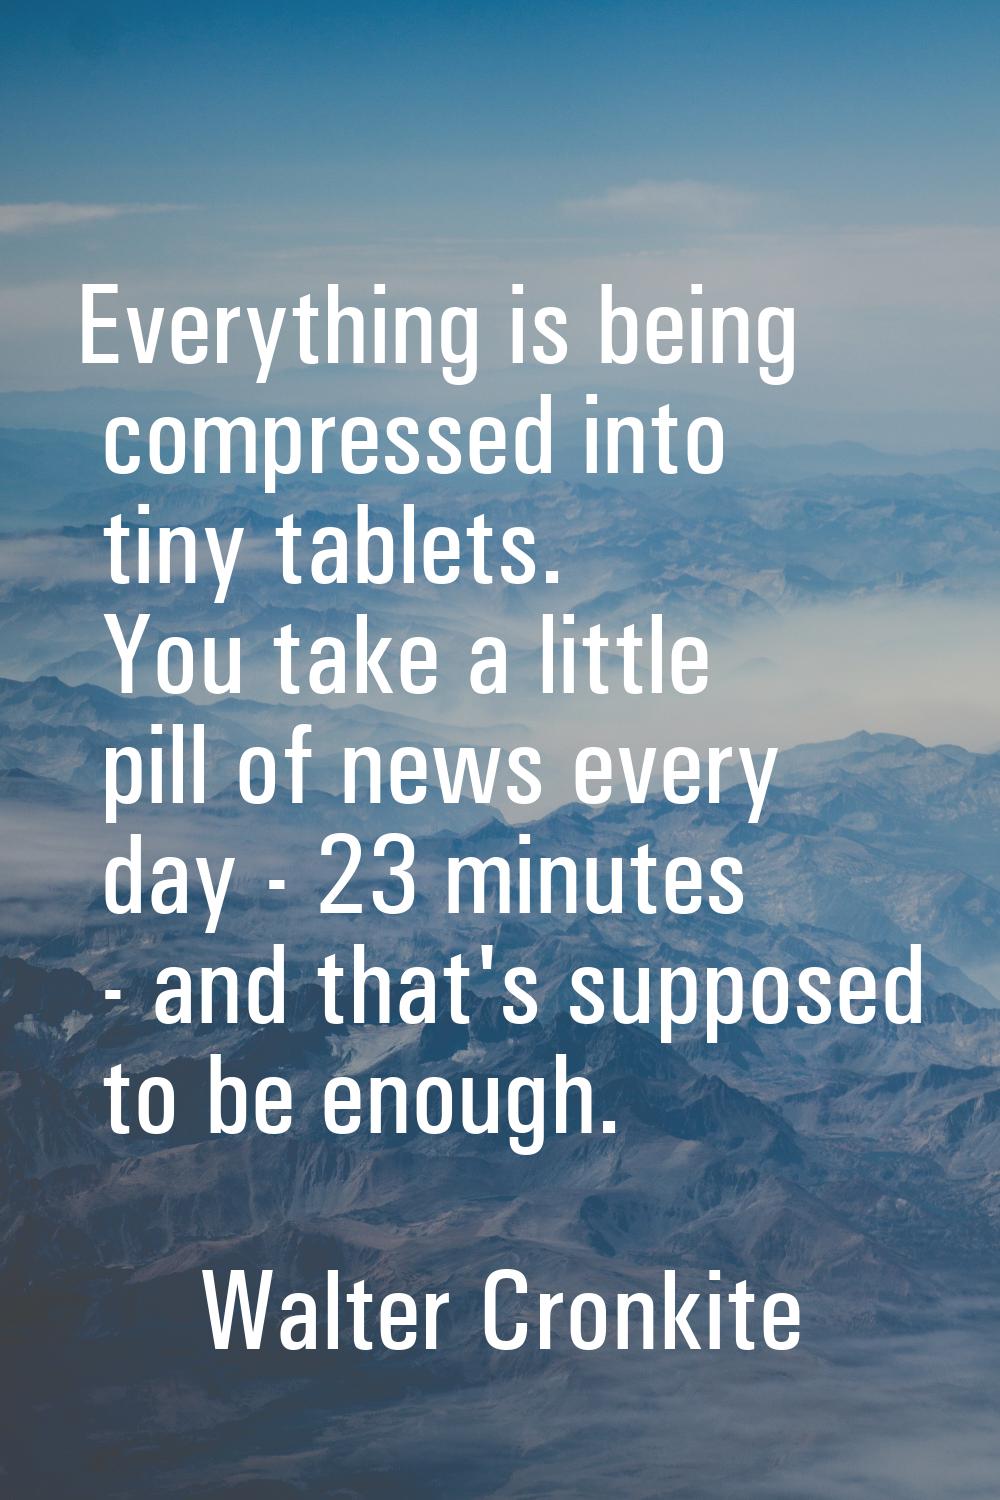 Everything is being compressed into tiny tablets. You take a little pill of news every day - 23 min